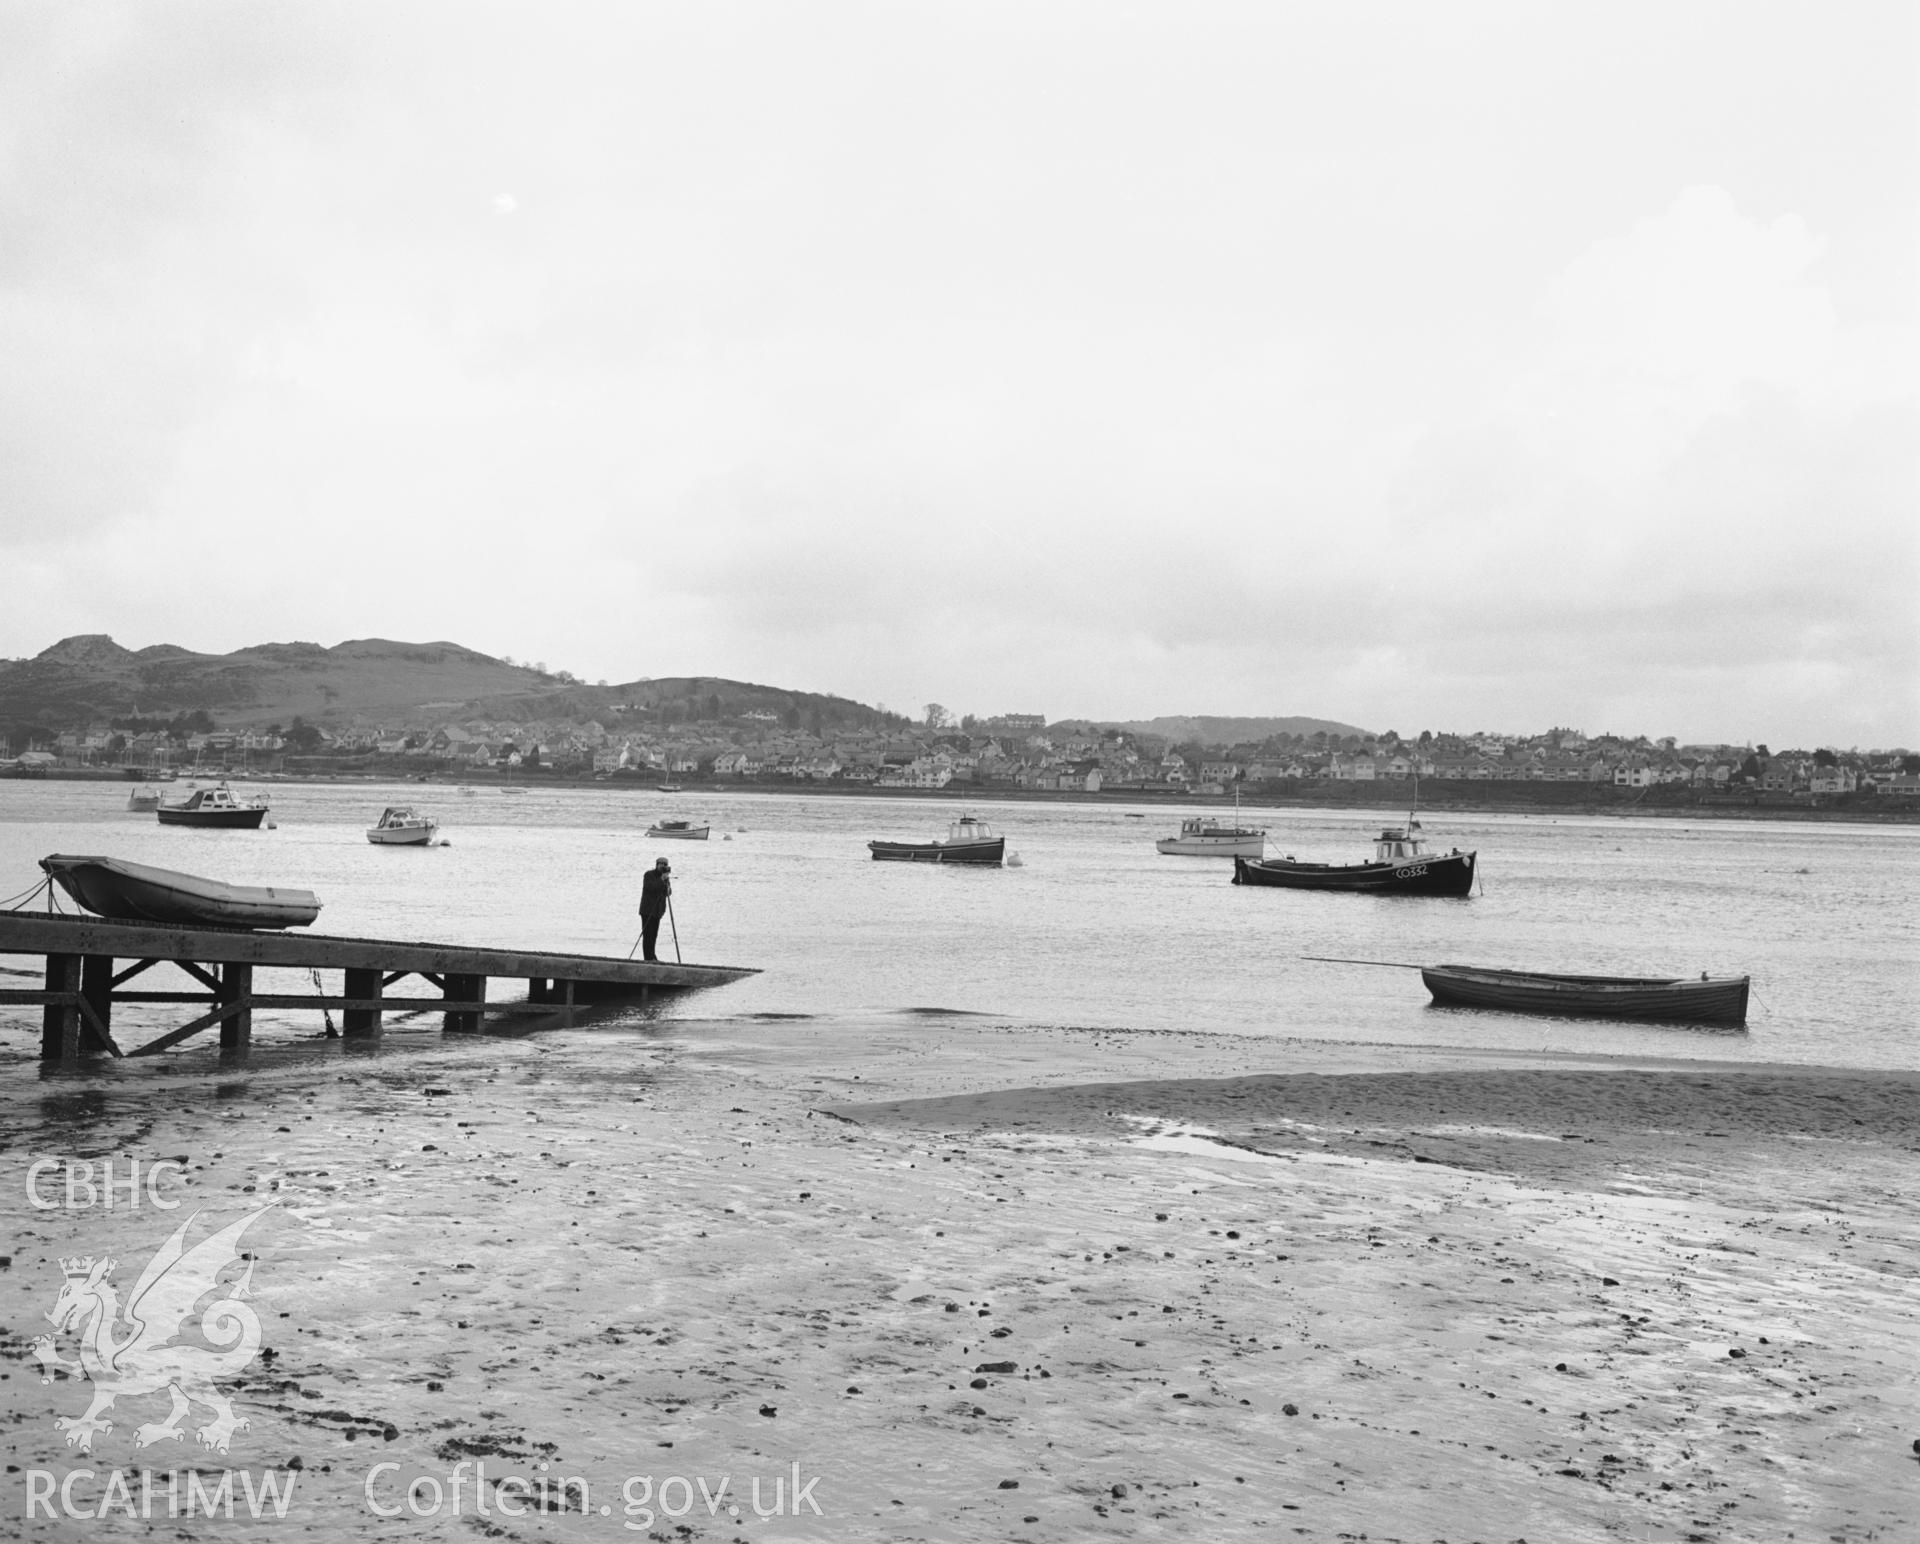 Photographic negative showing view of slipway and boats near Conwy Castle; collated by the former Central Office of Information.